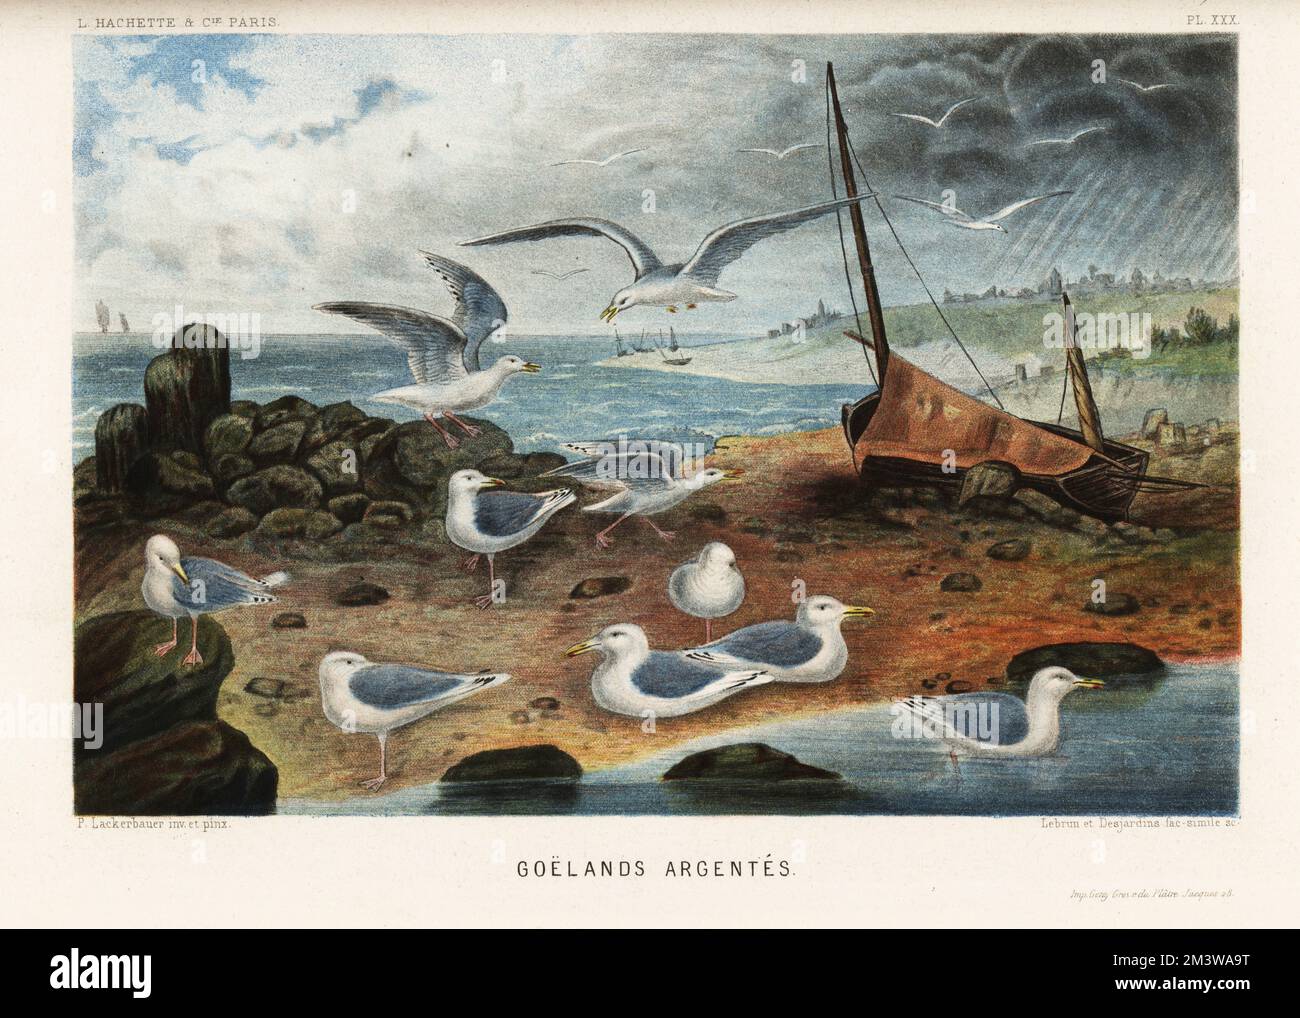 European herring gulls, Larus argentatus. On a beach near rocks and sailboats. Goelands argentes. Chromolithograph by Pierre Lackerbauer from Alfred Fredol’s Le Monde de la Mer, the World of the Sea, edited by Olivier Fredol, Librairie Hachette et. Cie., Paris, 1881. Alfred Fredol was the pseudonym of French zoologist and botanist Alfred Moquin-Tandon, 1804-1863. Stock Photo